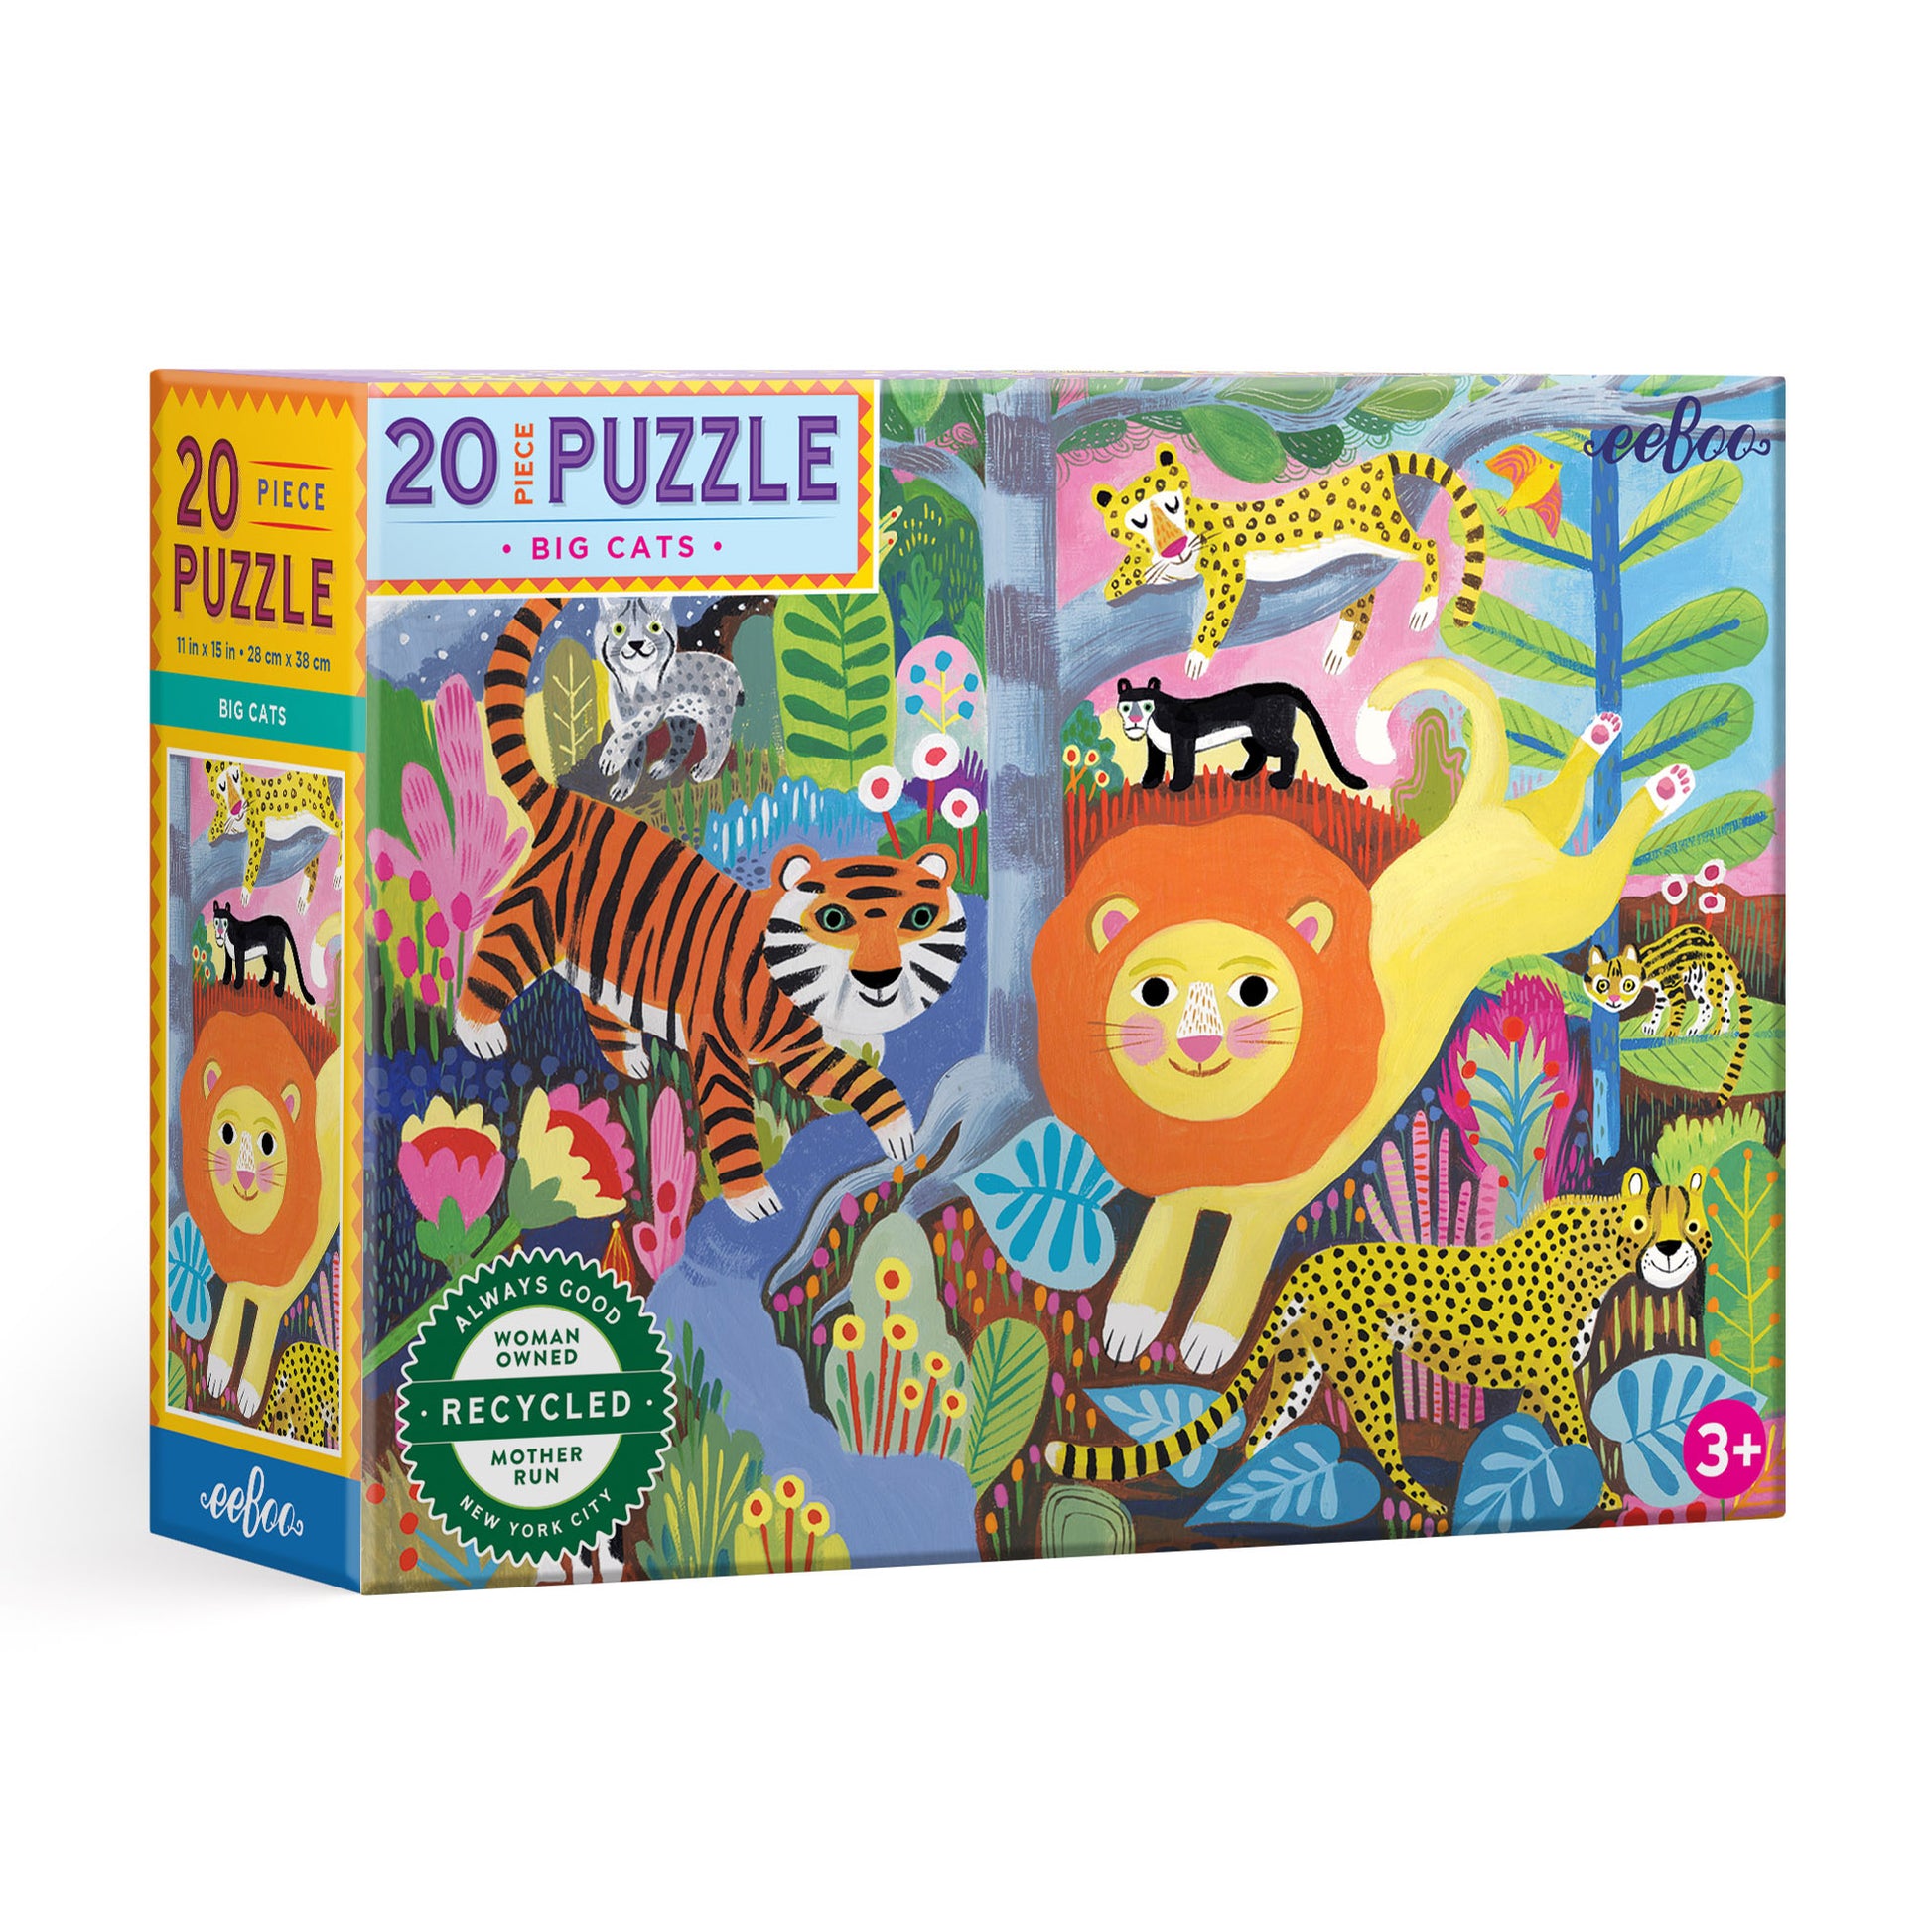 Big Jungle Cats 20 Piece Jigsaw Puzzle | Unique Gifts for Kids Ages 3+